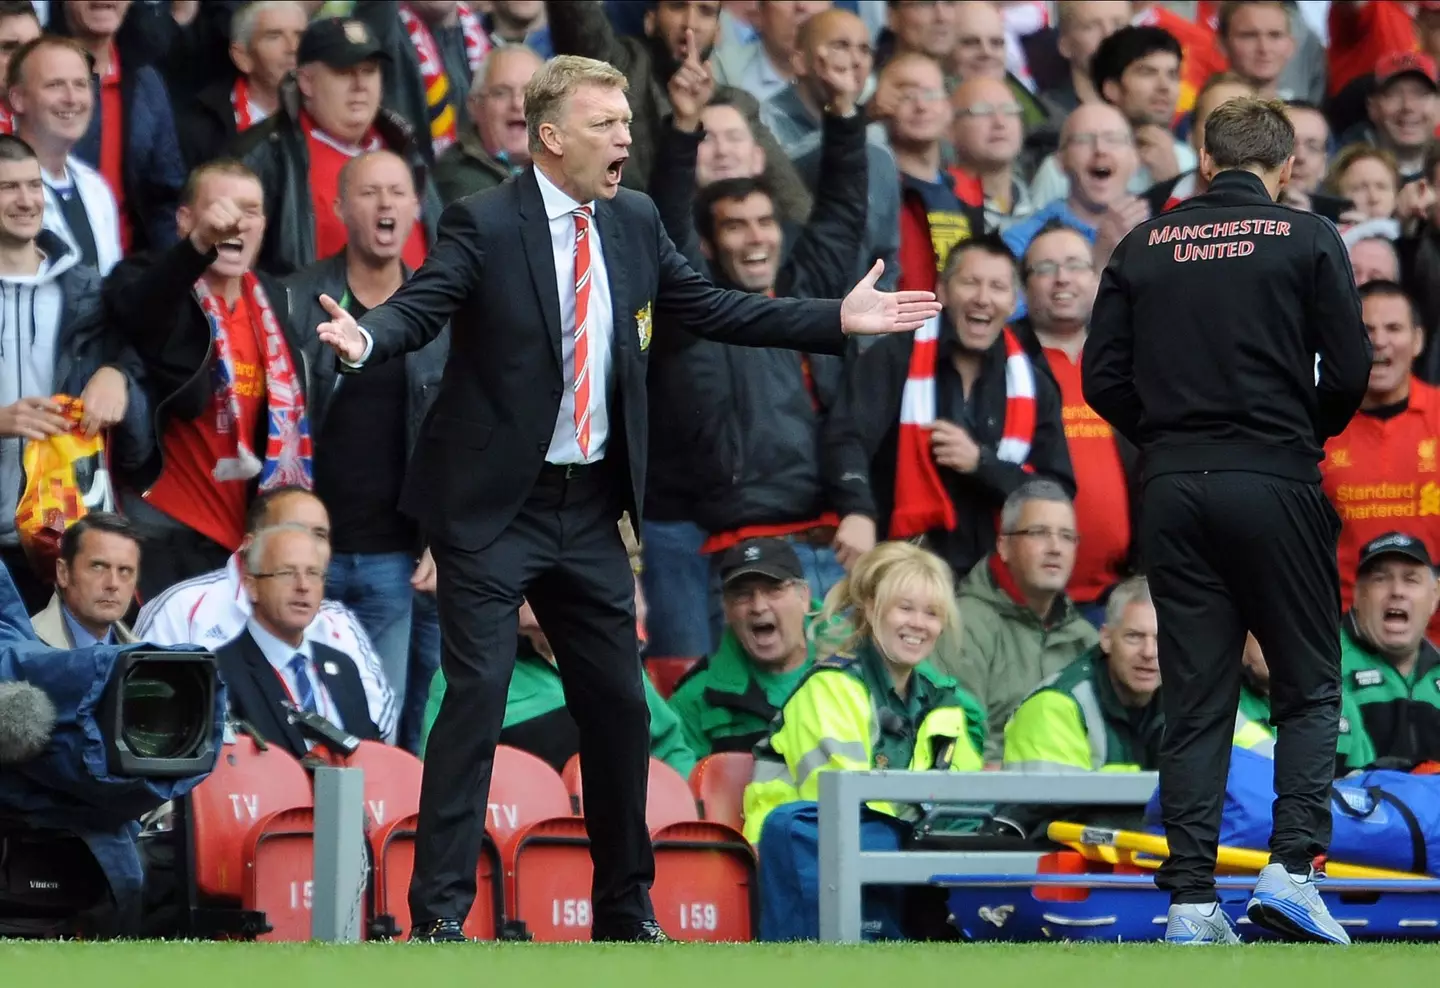 Moyes suffered a 1-0 defeat to Liverpool early on in his short spell as United manager (Image: Alamy)